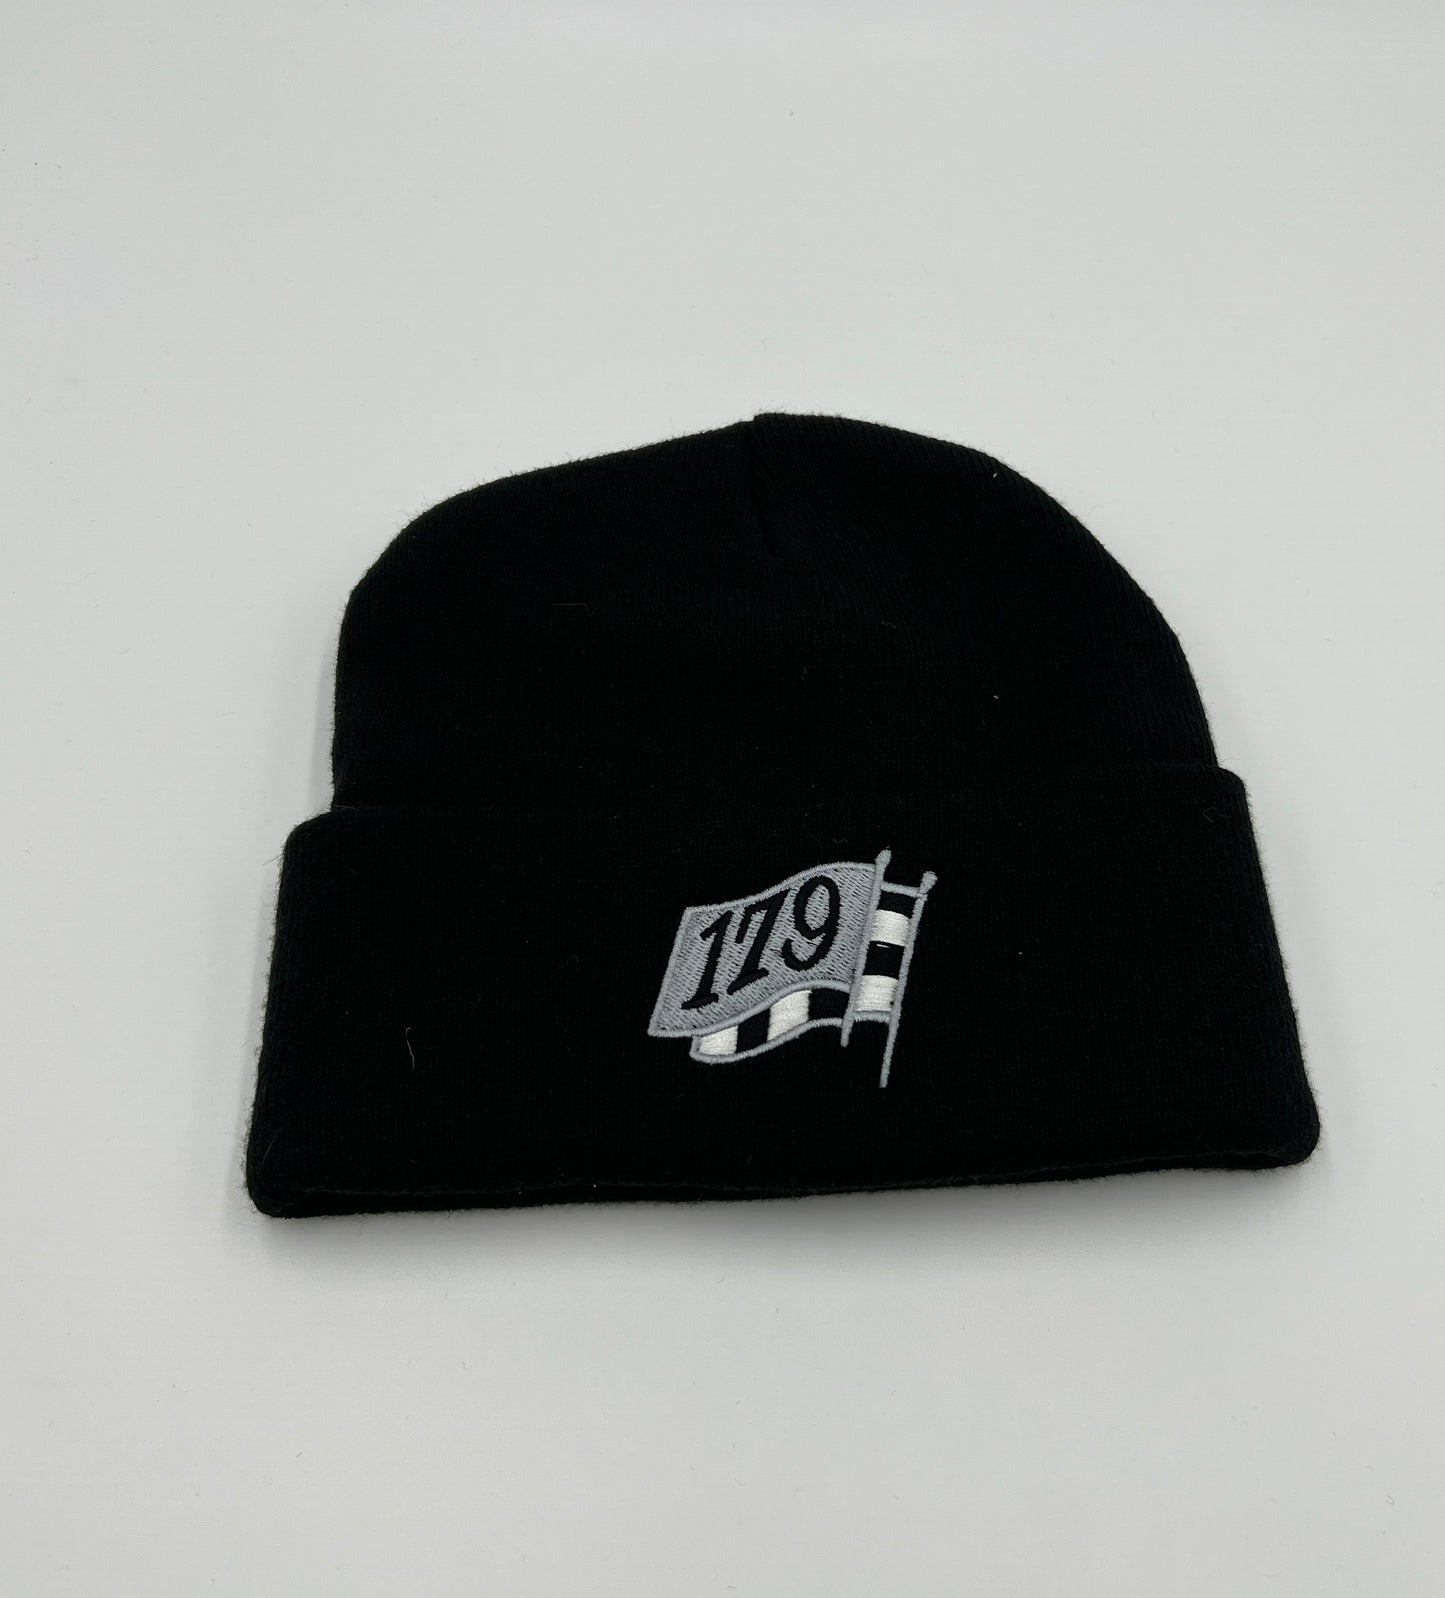 179 Flag Embroidered Beanie